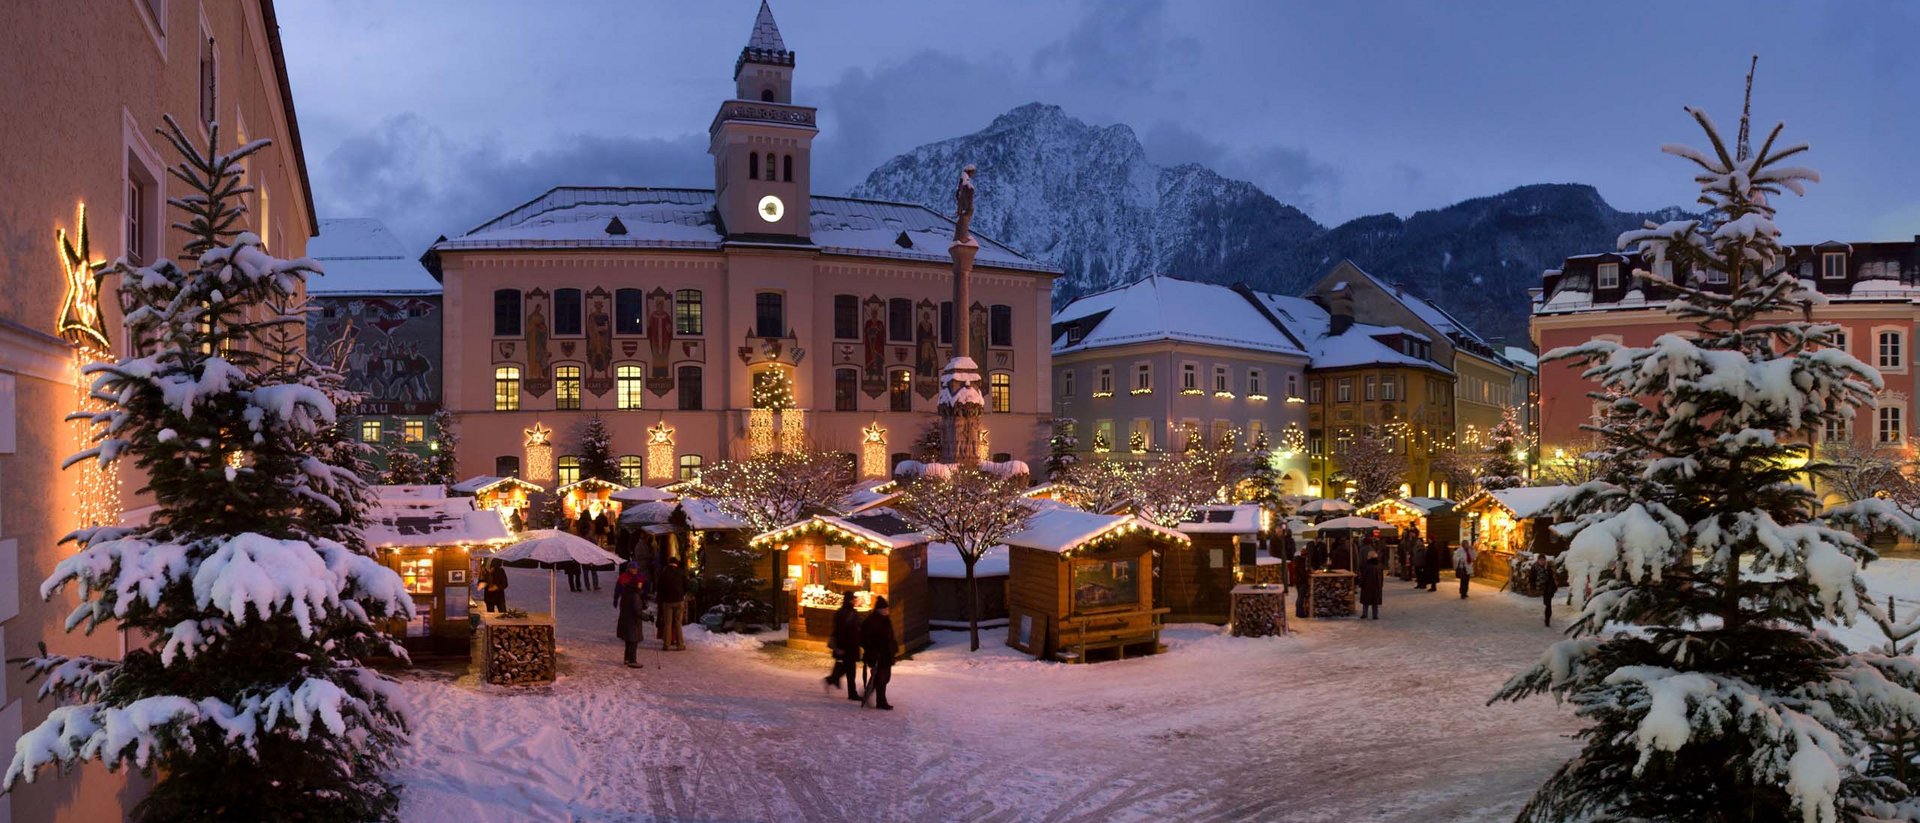 Worth seeing: the Christmas market in Bad Reichenhall